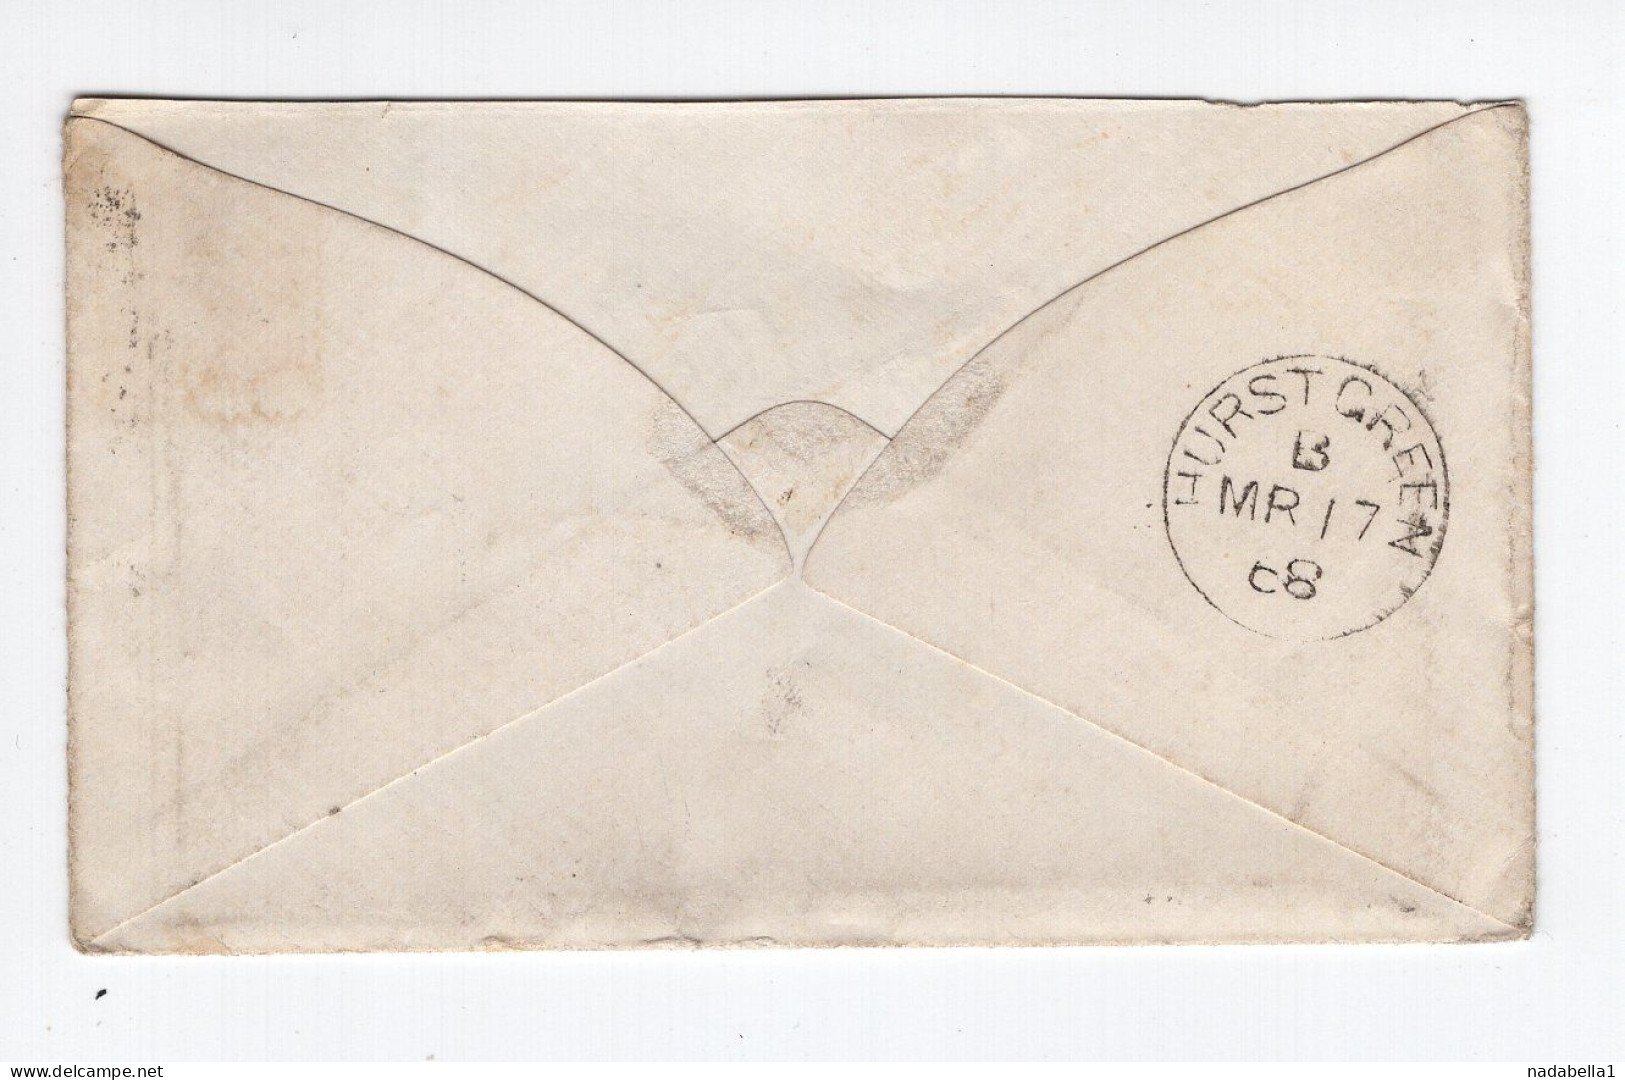 1868. GREAT BRITAIN,ENGLAND,OXFORD TO HURST GREEN COVER,1 PENNY RED,PERF.,SMALL SCALE COVER - Storia Postale